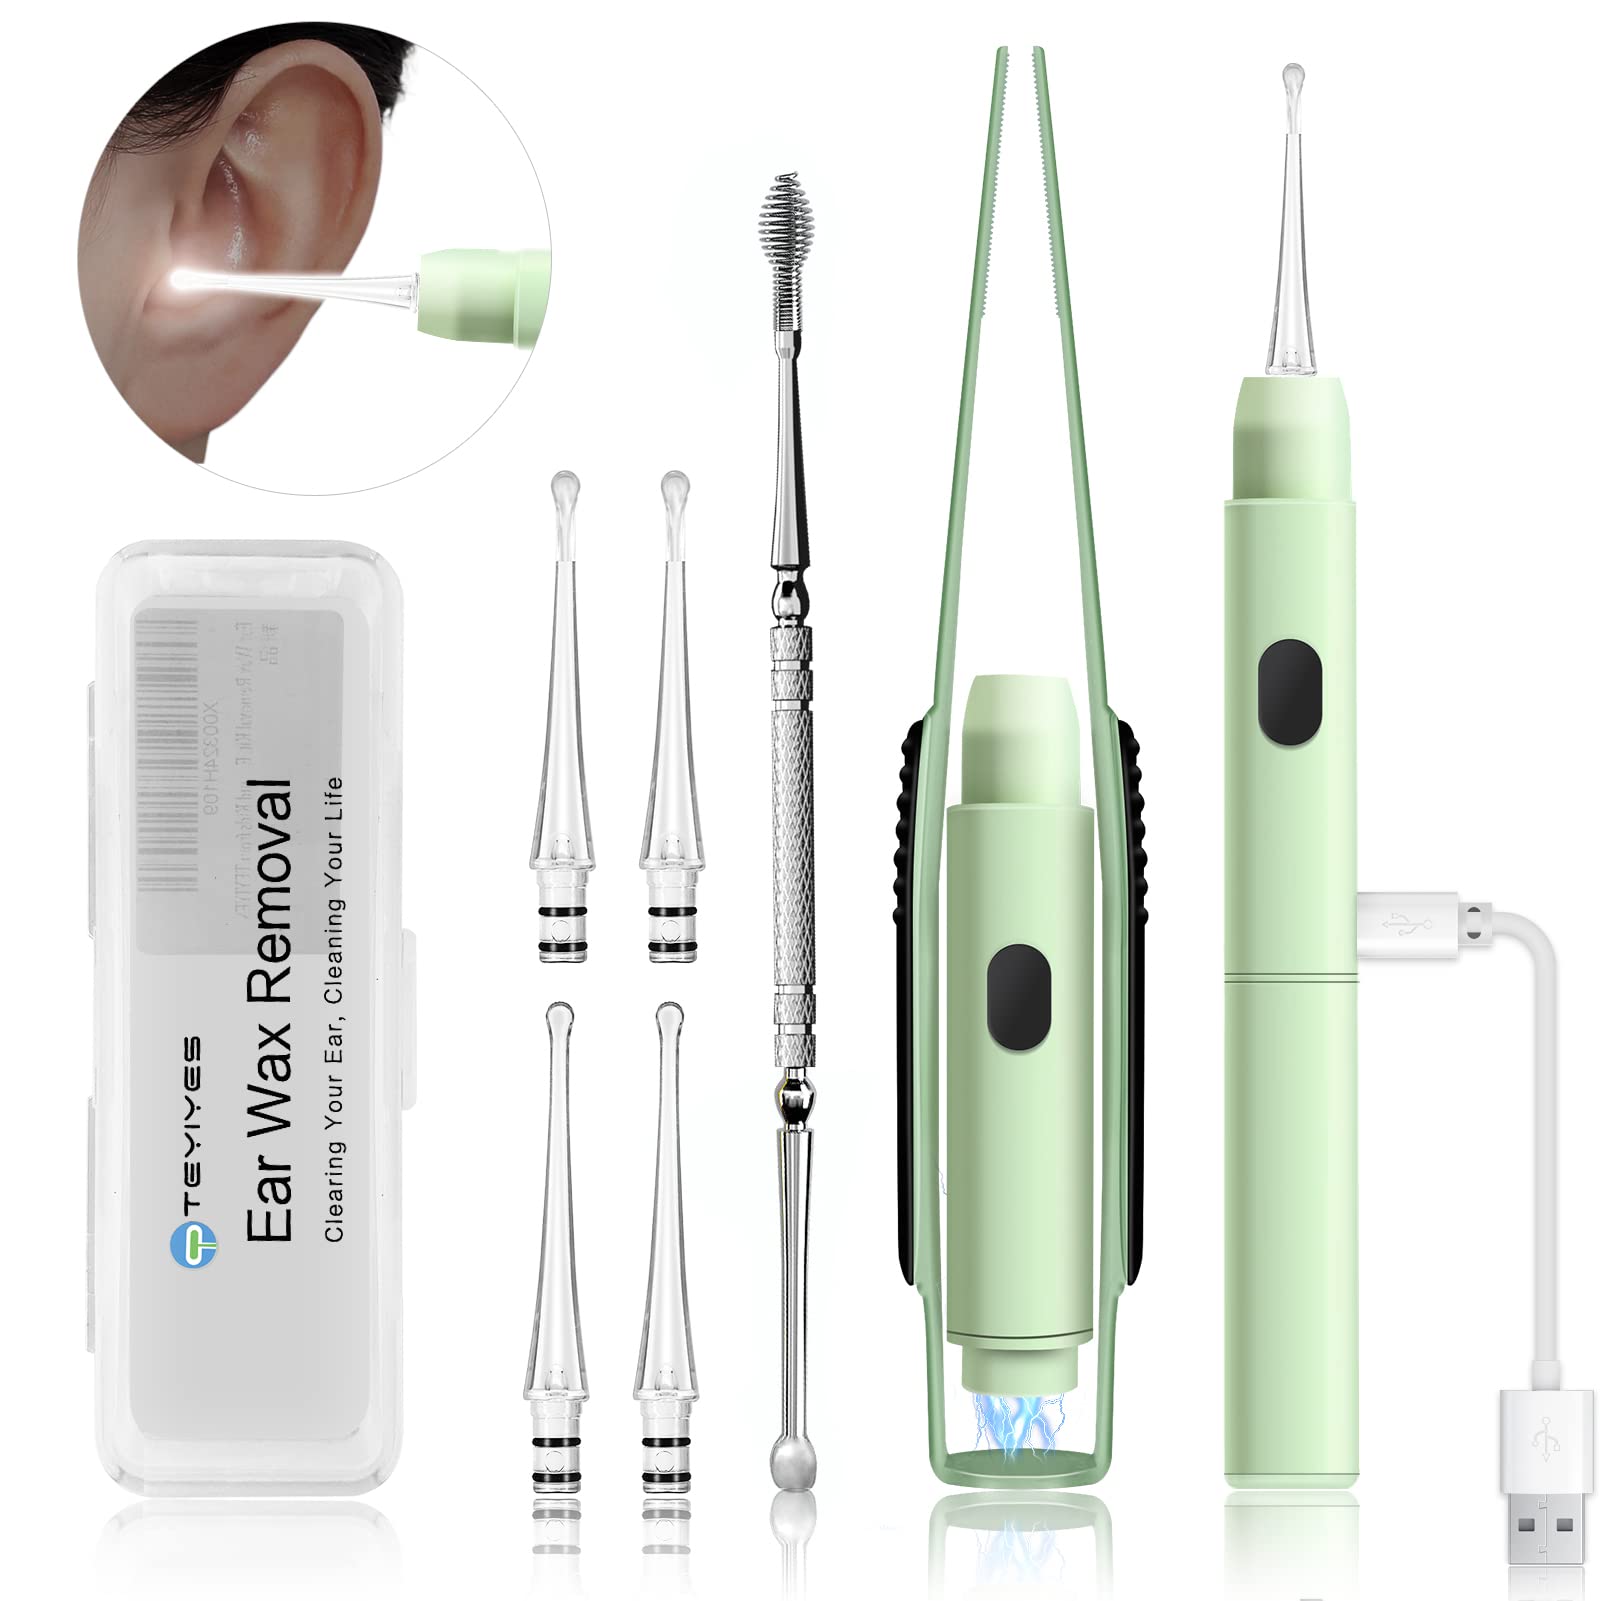 Automatic Ear Wax Remover Safe Easy Earwax Cleaner Earpick Tool Spiral  Cleaner Prevent Ear-pick Clean Tool